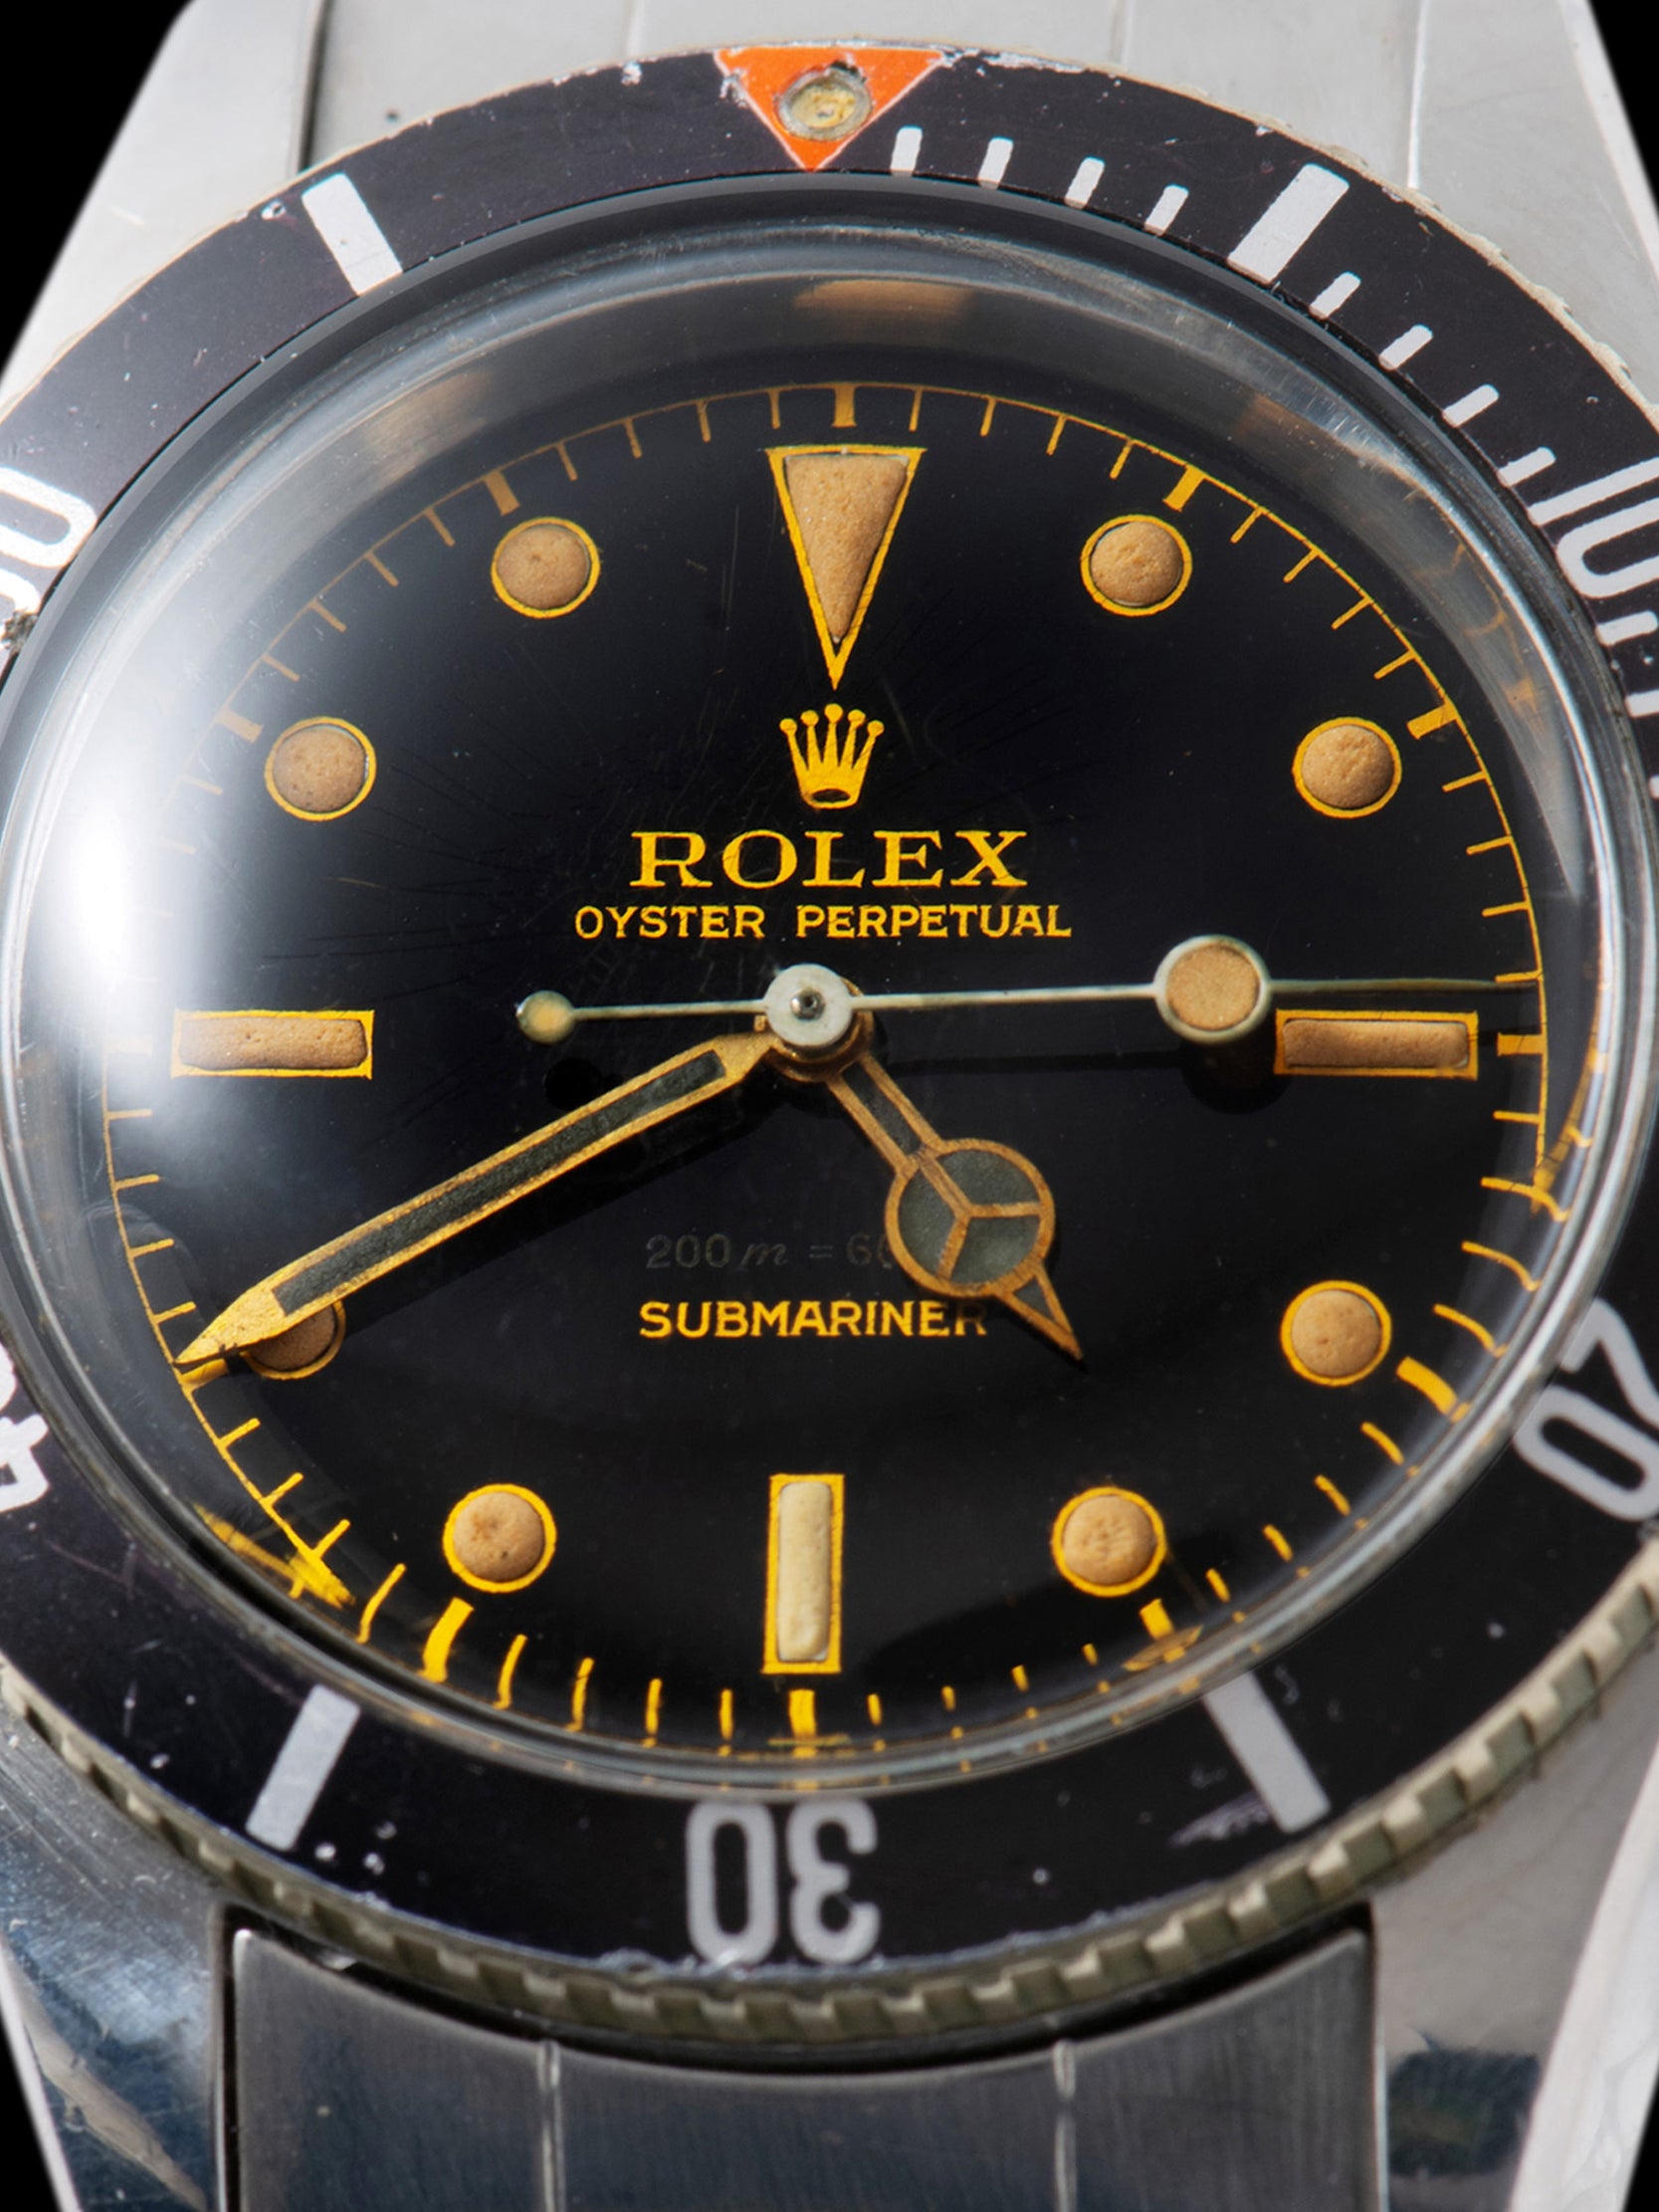 1957 Rolex Submariner (Ref. 6538) Crown" From The Fa